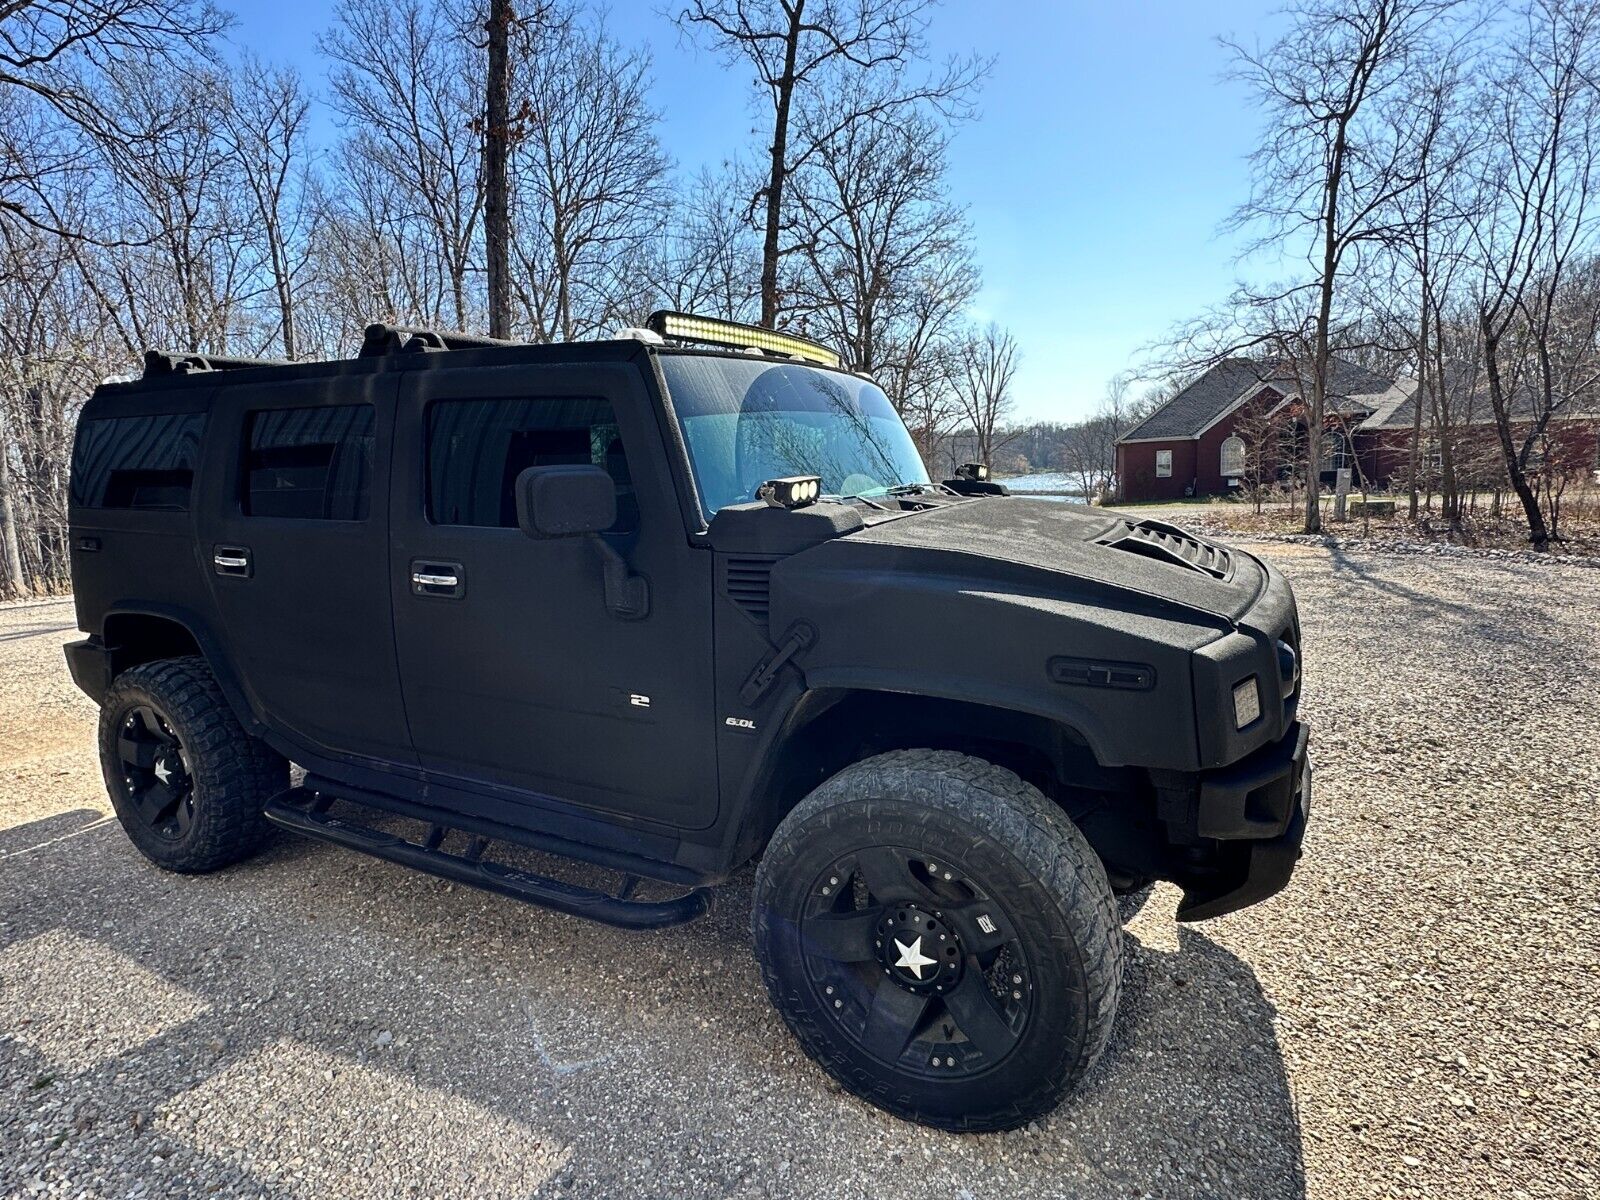 2003 Hummer H2 Black Ops exterior with Luxury Package